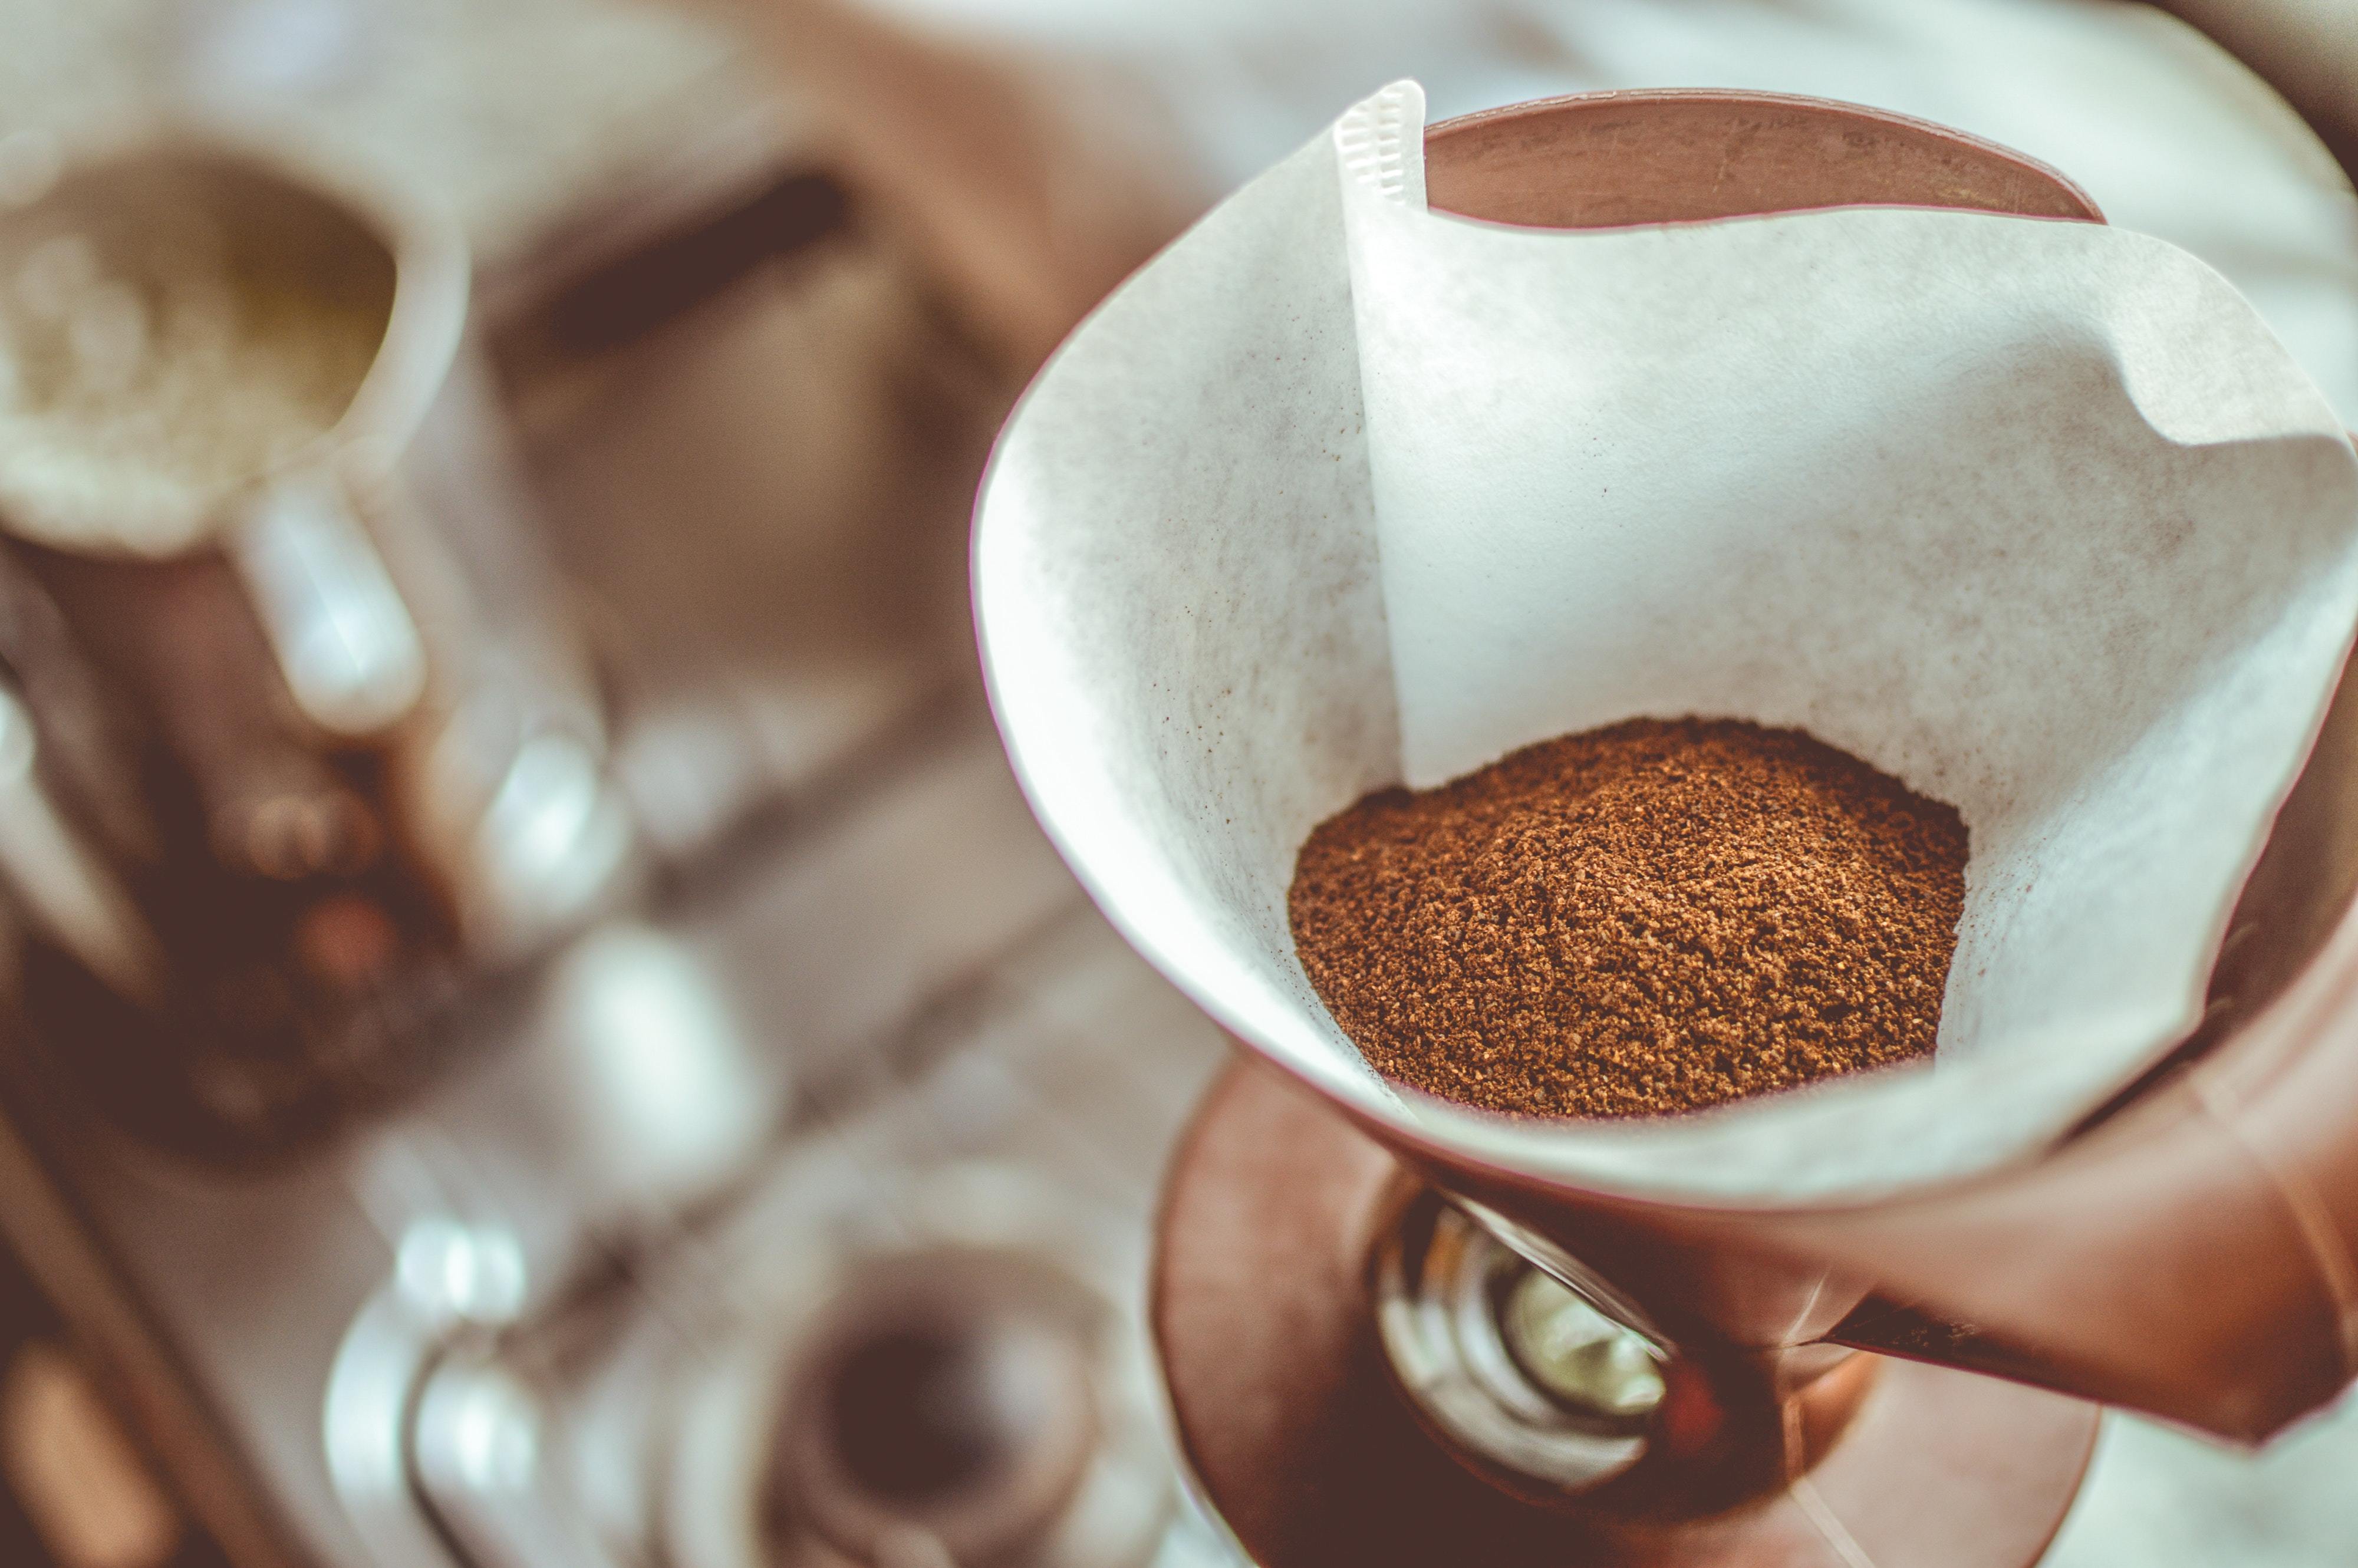 Brewed coffee grounds offer sustainable alternative for clothing dye